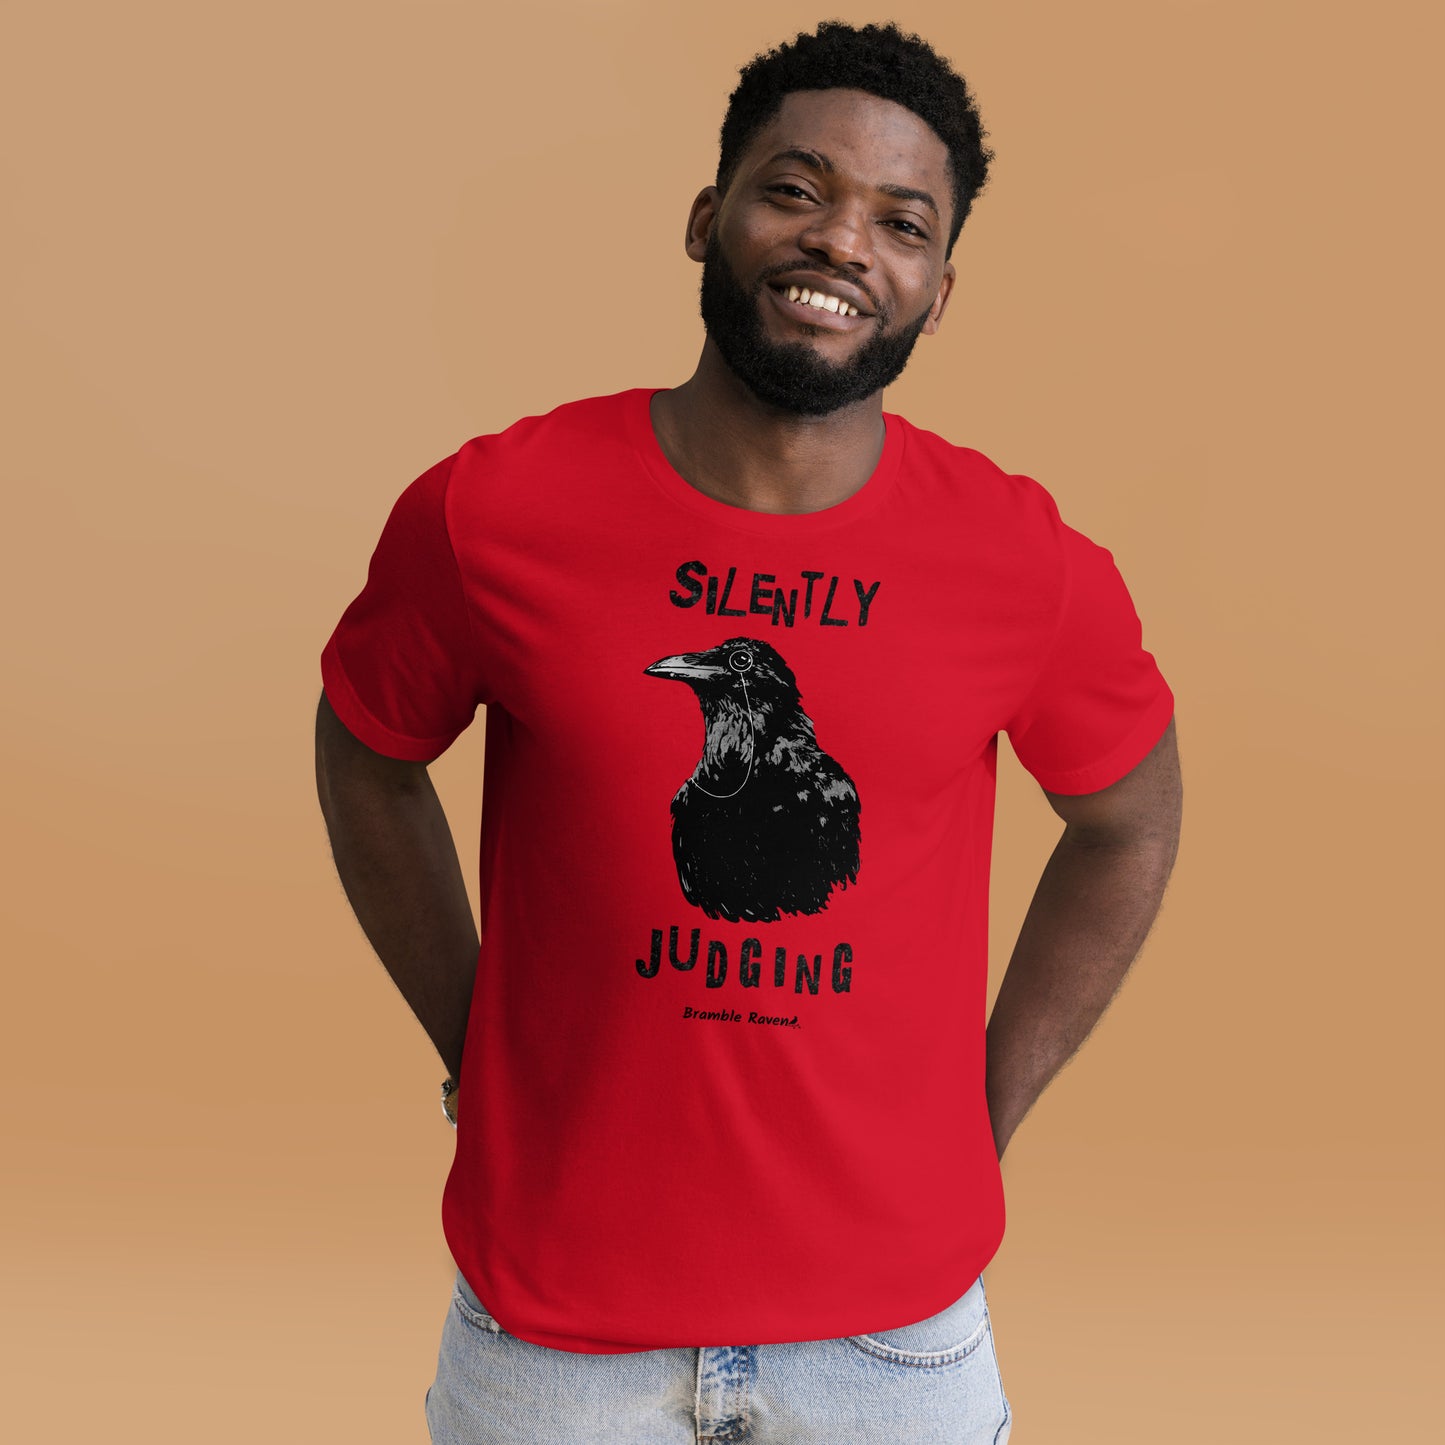 Unisex red colored t-shirt. Features vertical image of silently judging text above and below black crow wearing a monocle.  Shown on male model.